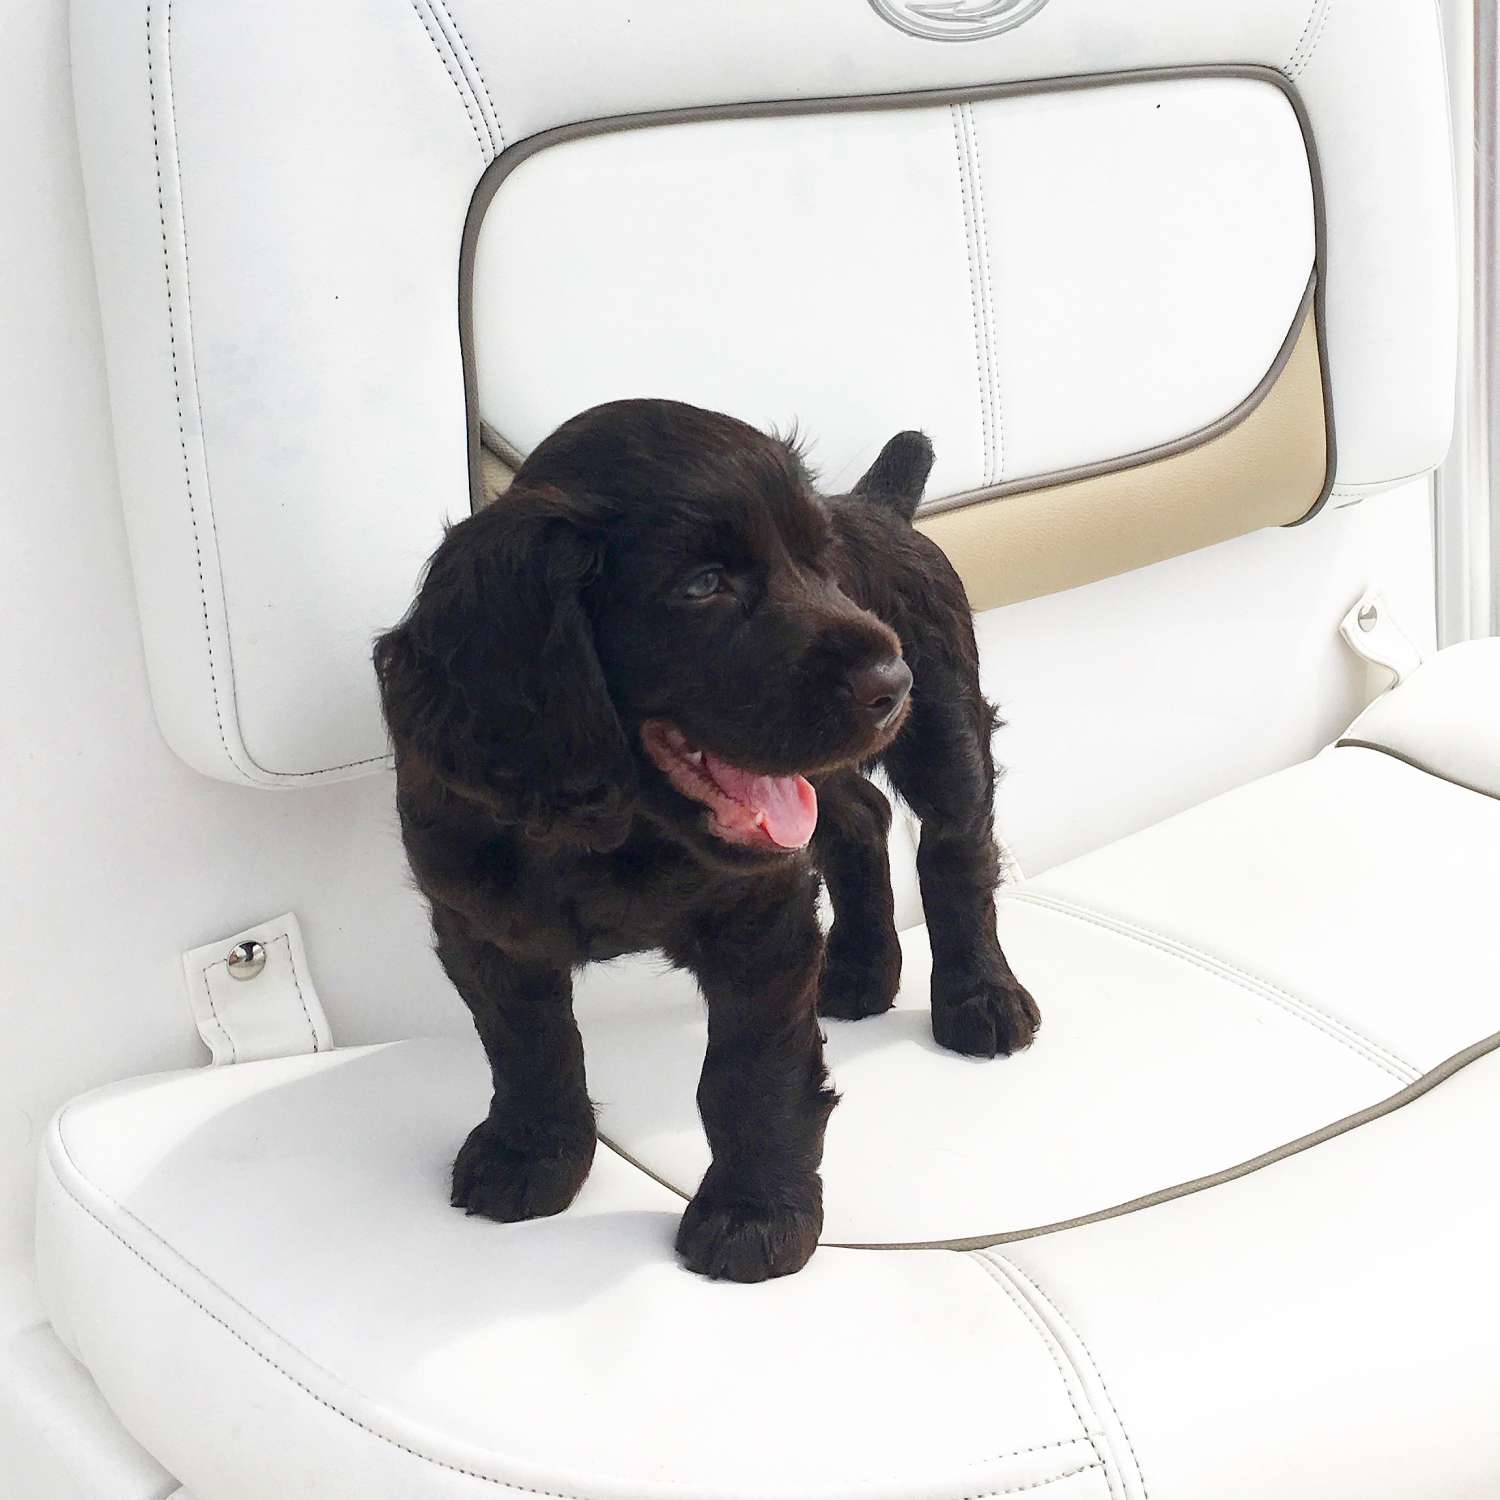 My photo was taken while out fishing in the Pamlico Sound. This was our Boykin Spaniel Coy's first boat ride.